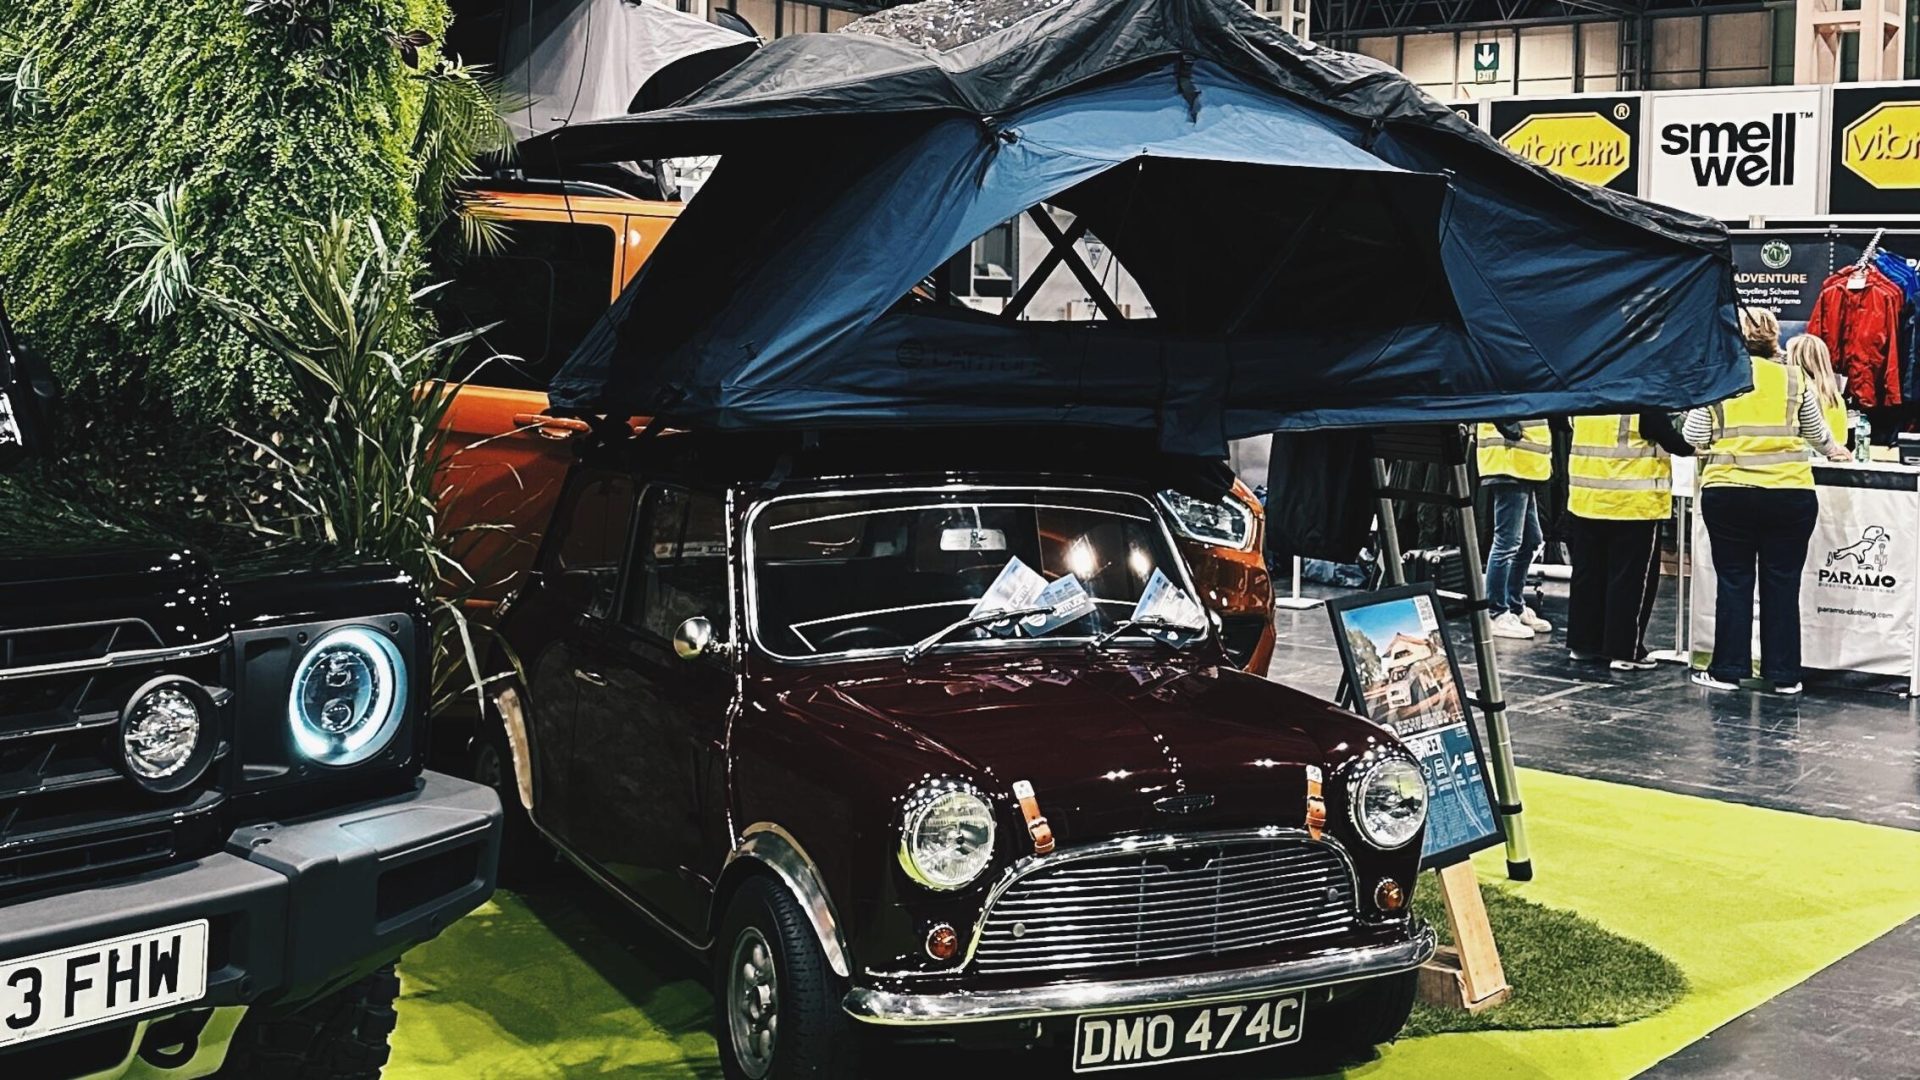 A blue rooftop tent is open on top of a vintage red Mini Cooper.